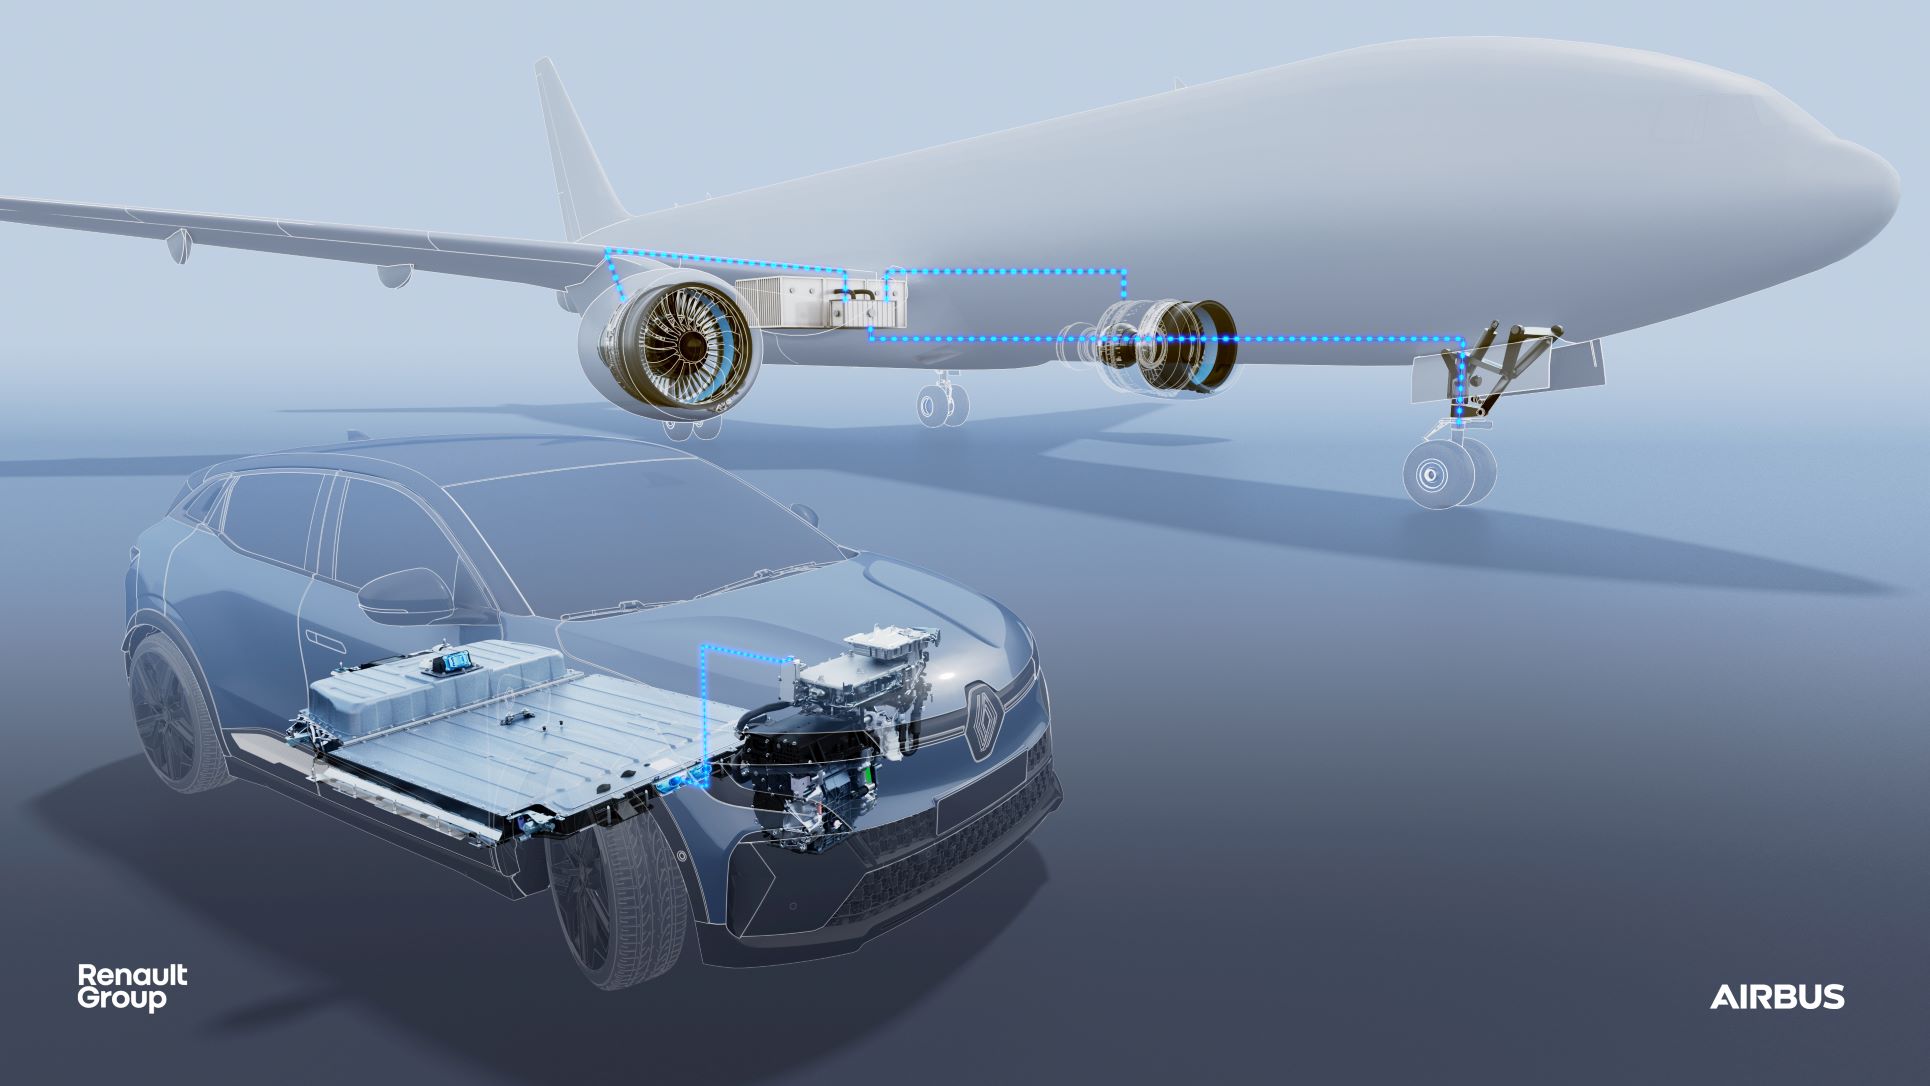 Renault's new Megane e-Tech depicted next to an Airbus aeroplane both with EV tech onboard.